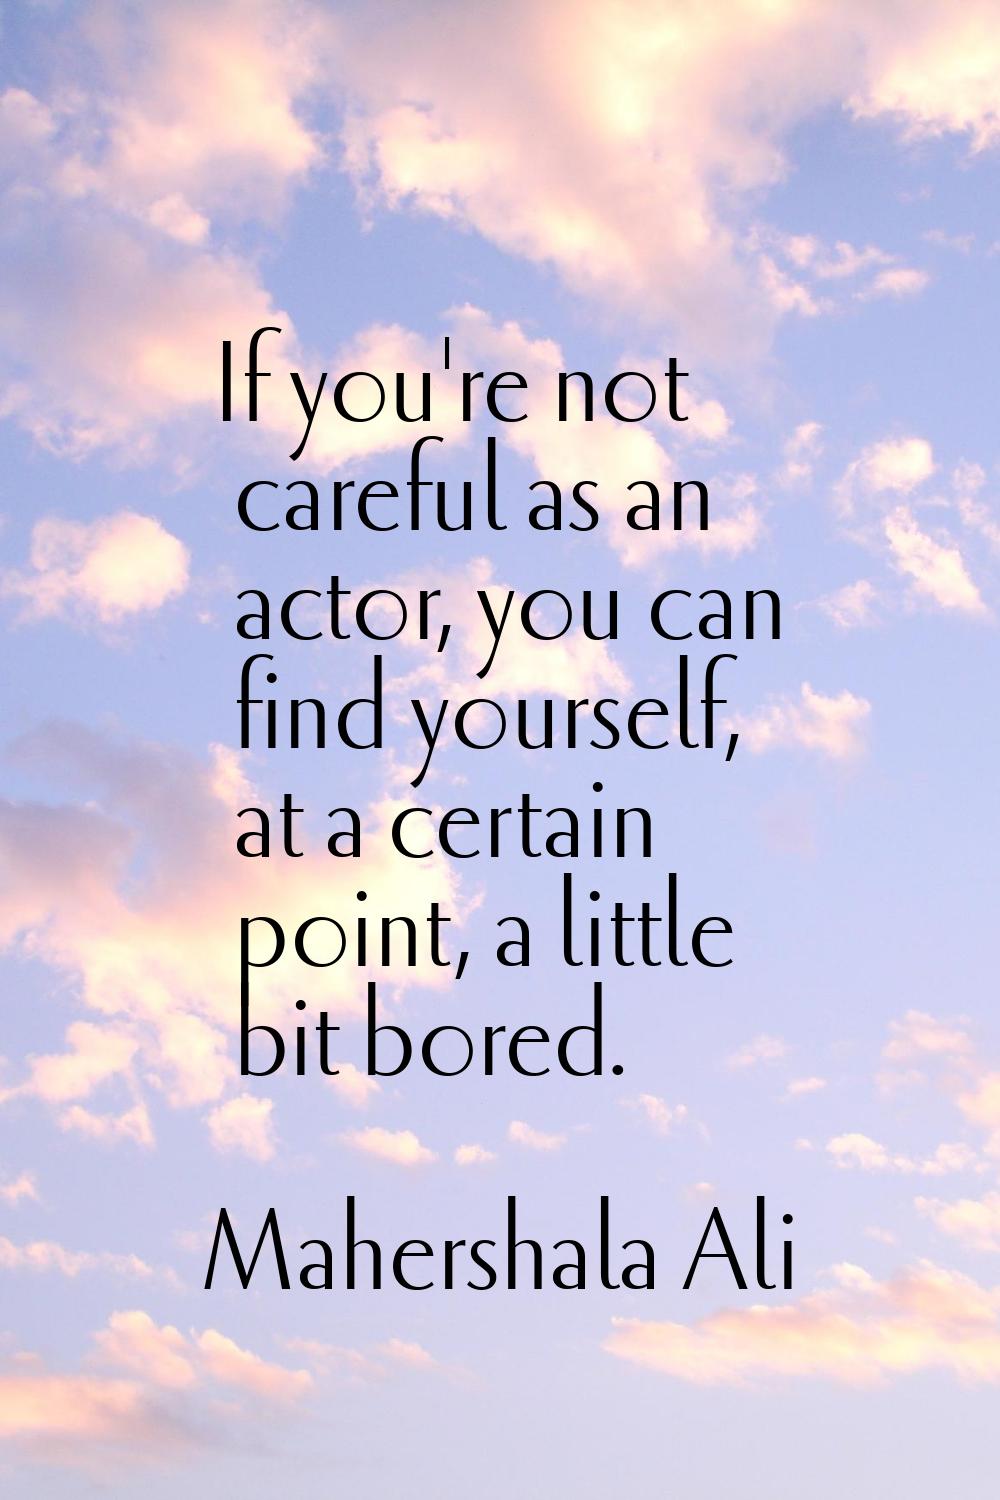 If you're not careful as an actor, you can find yourself, at a certain point, a little bit bored.